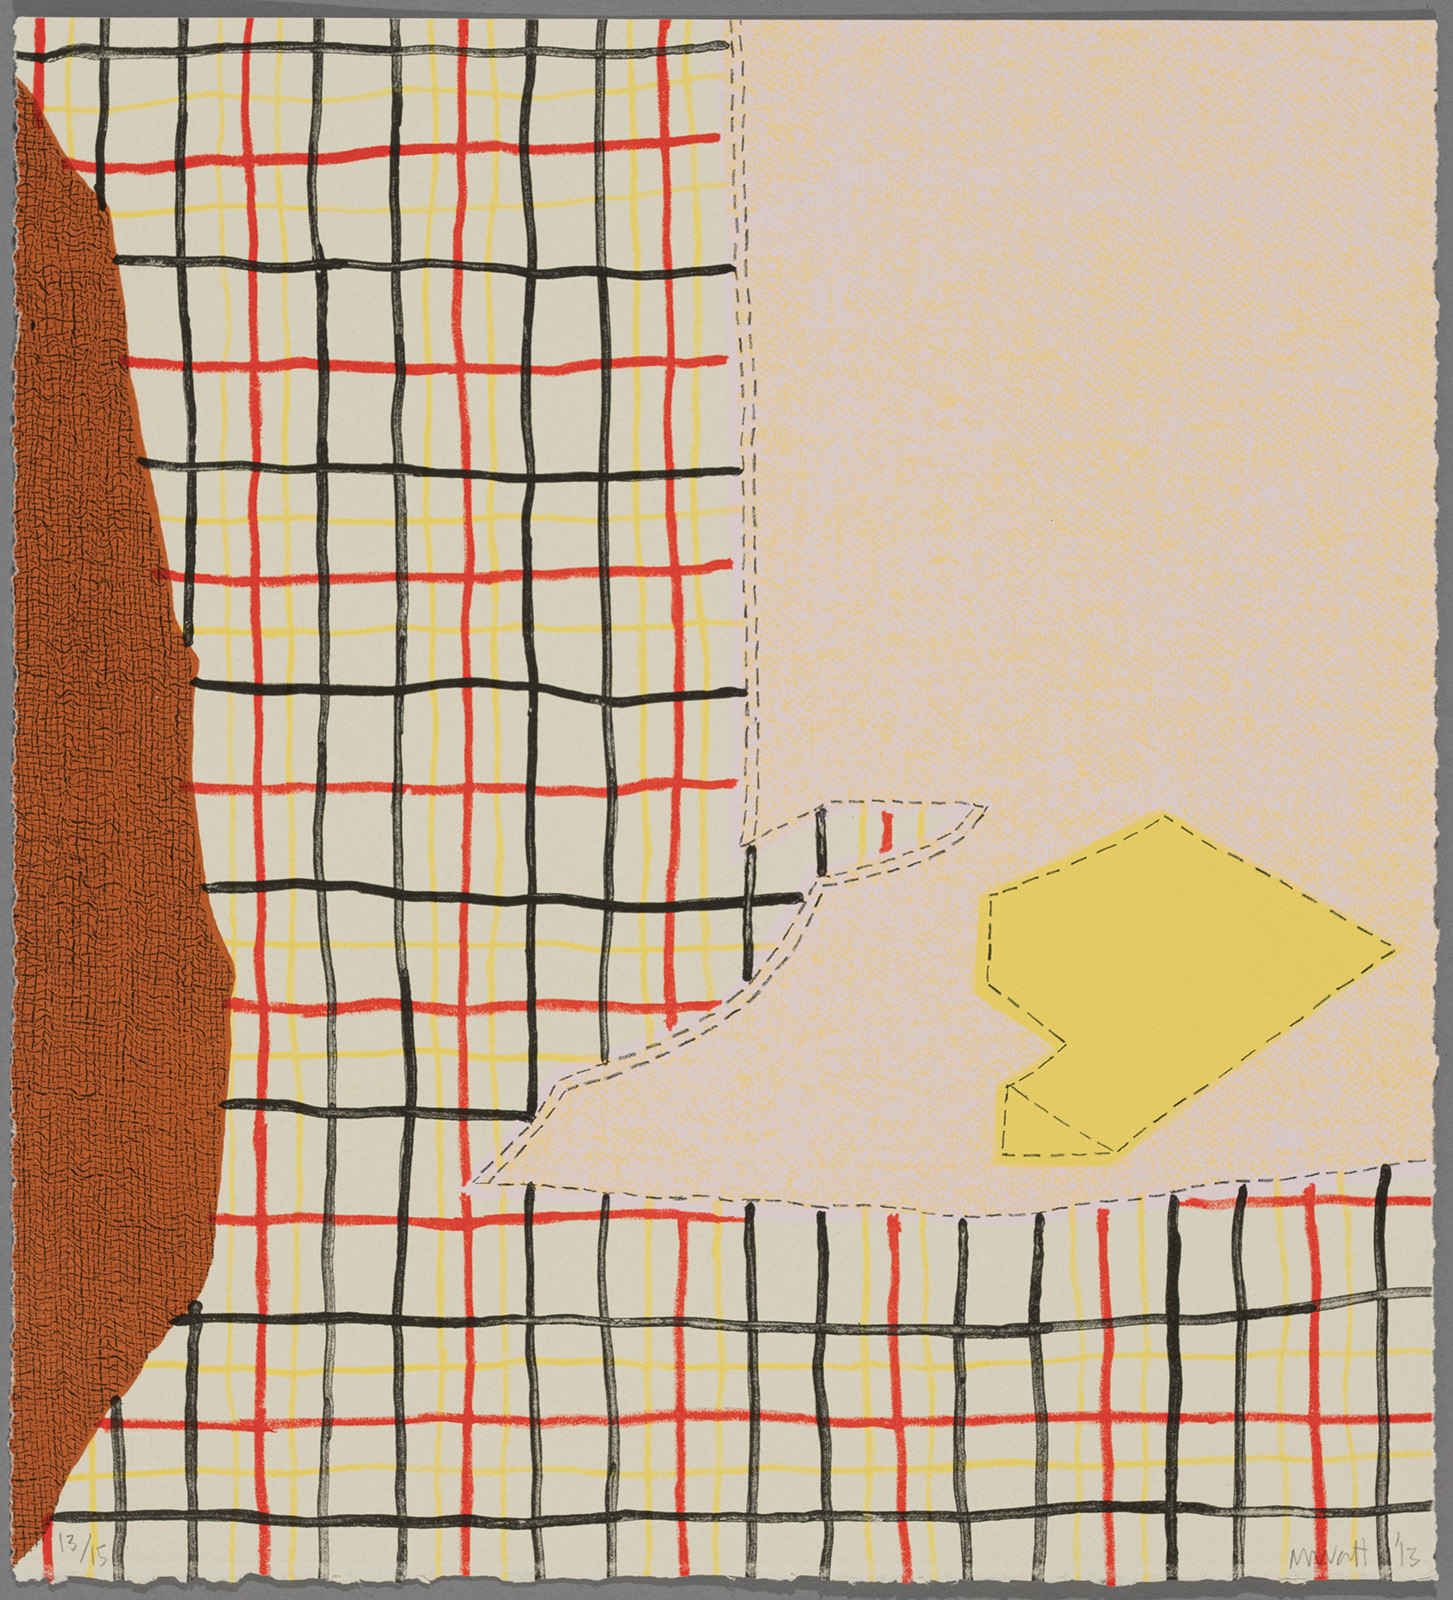 Drawing of crossing black, red, and yellow lines, with irregular shapes in cream, orange, and yellow outlined by dashed black lines